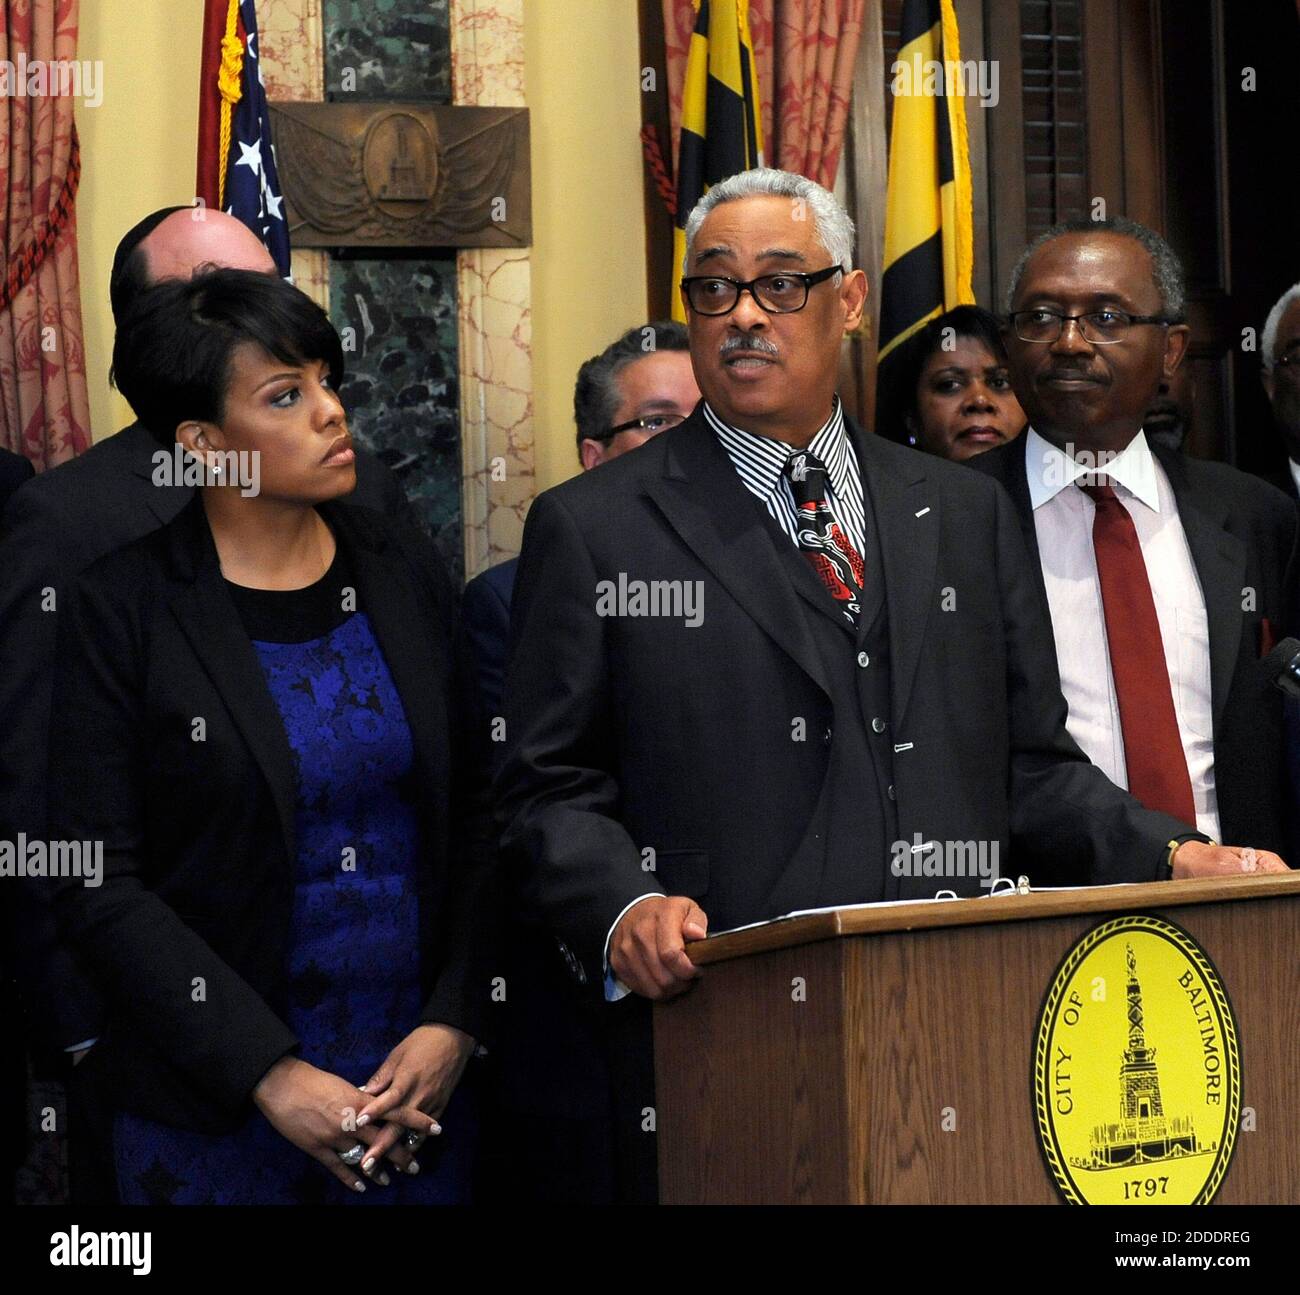 NO FILM, NO VIDEO, NO TV, NO DOCUMENTARY - Rev. Dr. Frank Reid III, pastor of Bethel AME, speaks from the podium next to Mayor Stephanie Rawlings-Blake as she holds a news conference after meeting with several faith-based leaders on Friday, April 24, 2015, to discuss the community response following the death of Freddie Gray. Photo by Barbara Haddock Taylor/Baltimore Sun/TNS/ABACAPRESS.COM Stock Photo